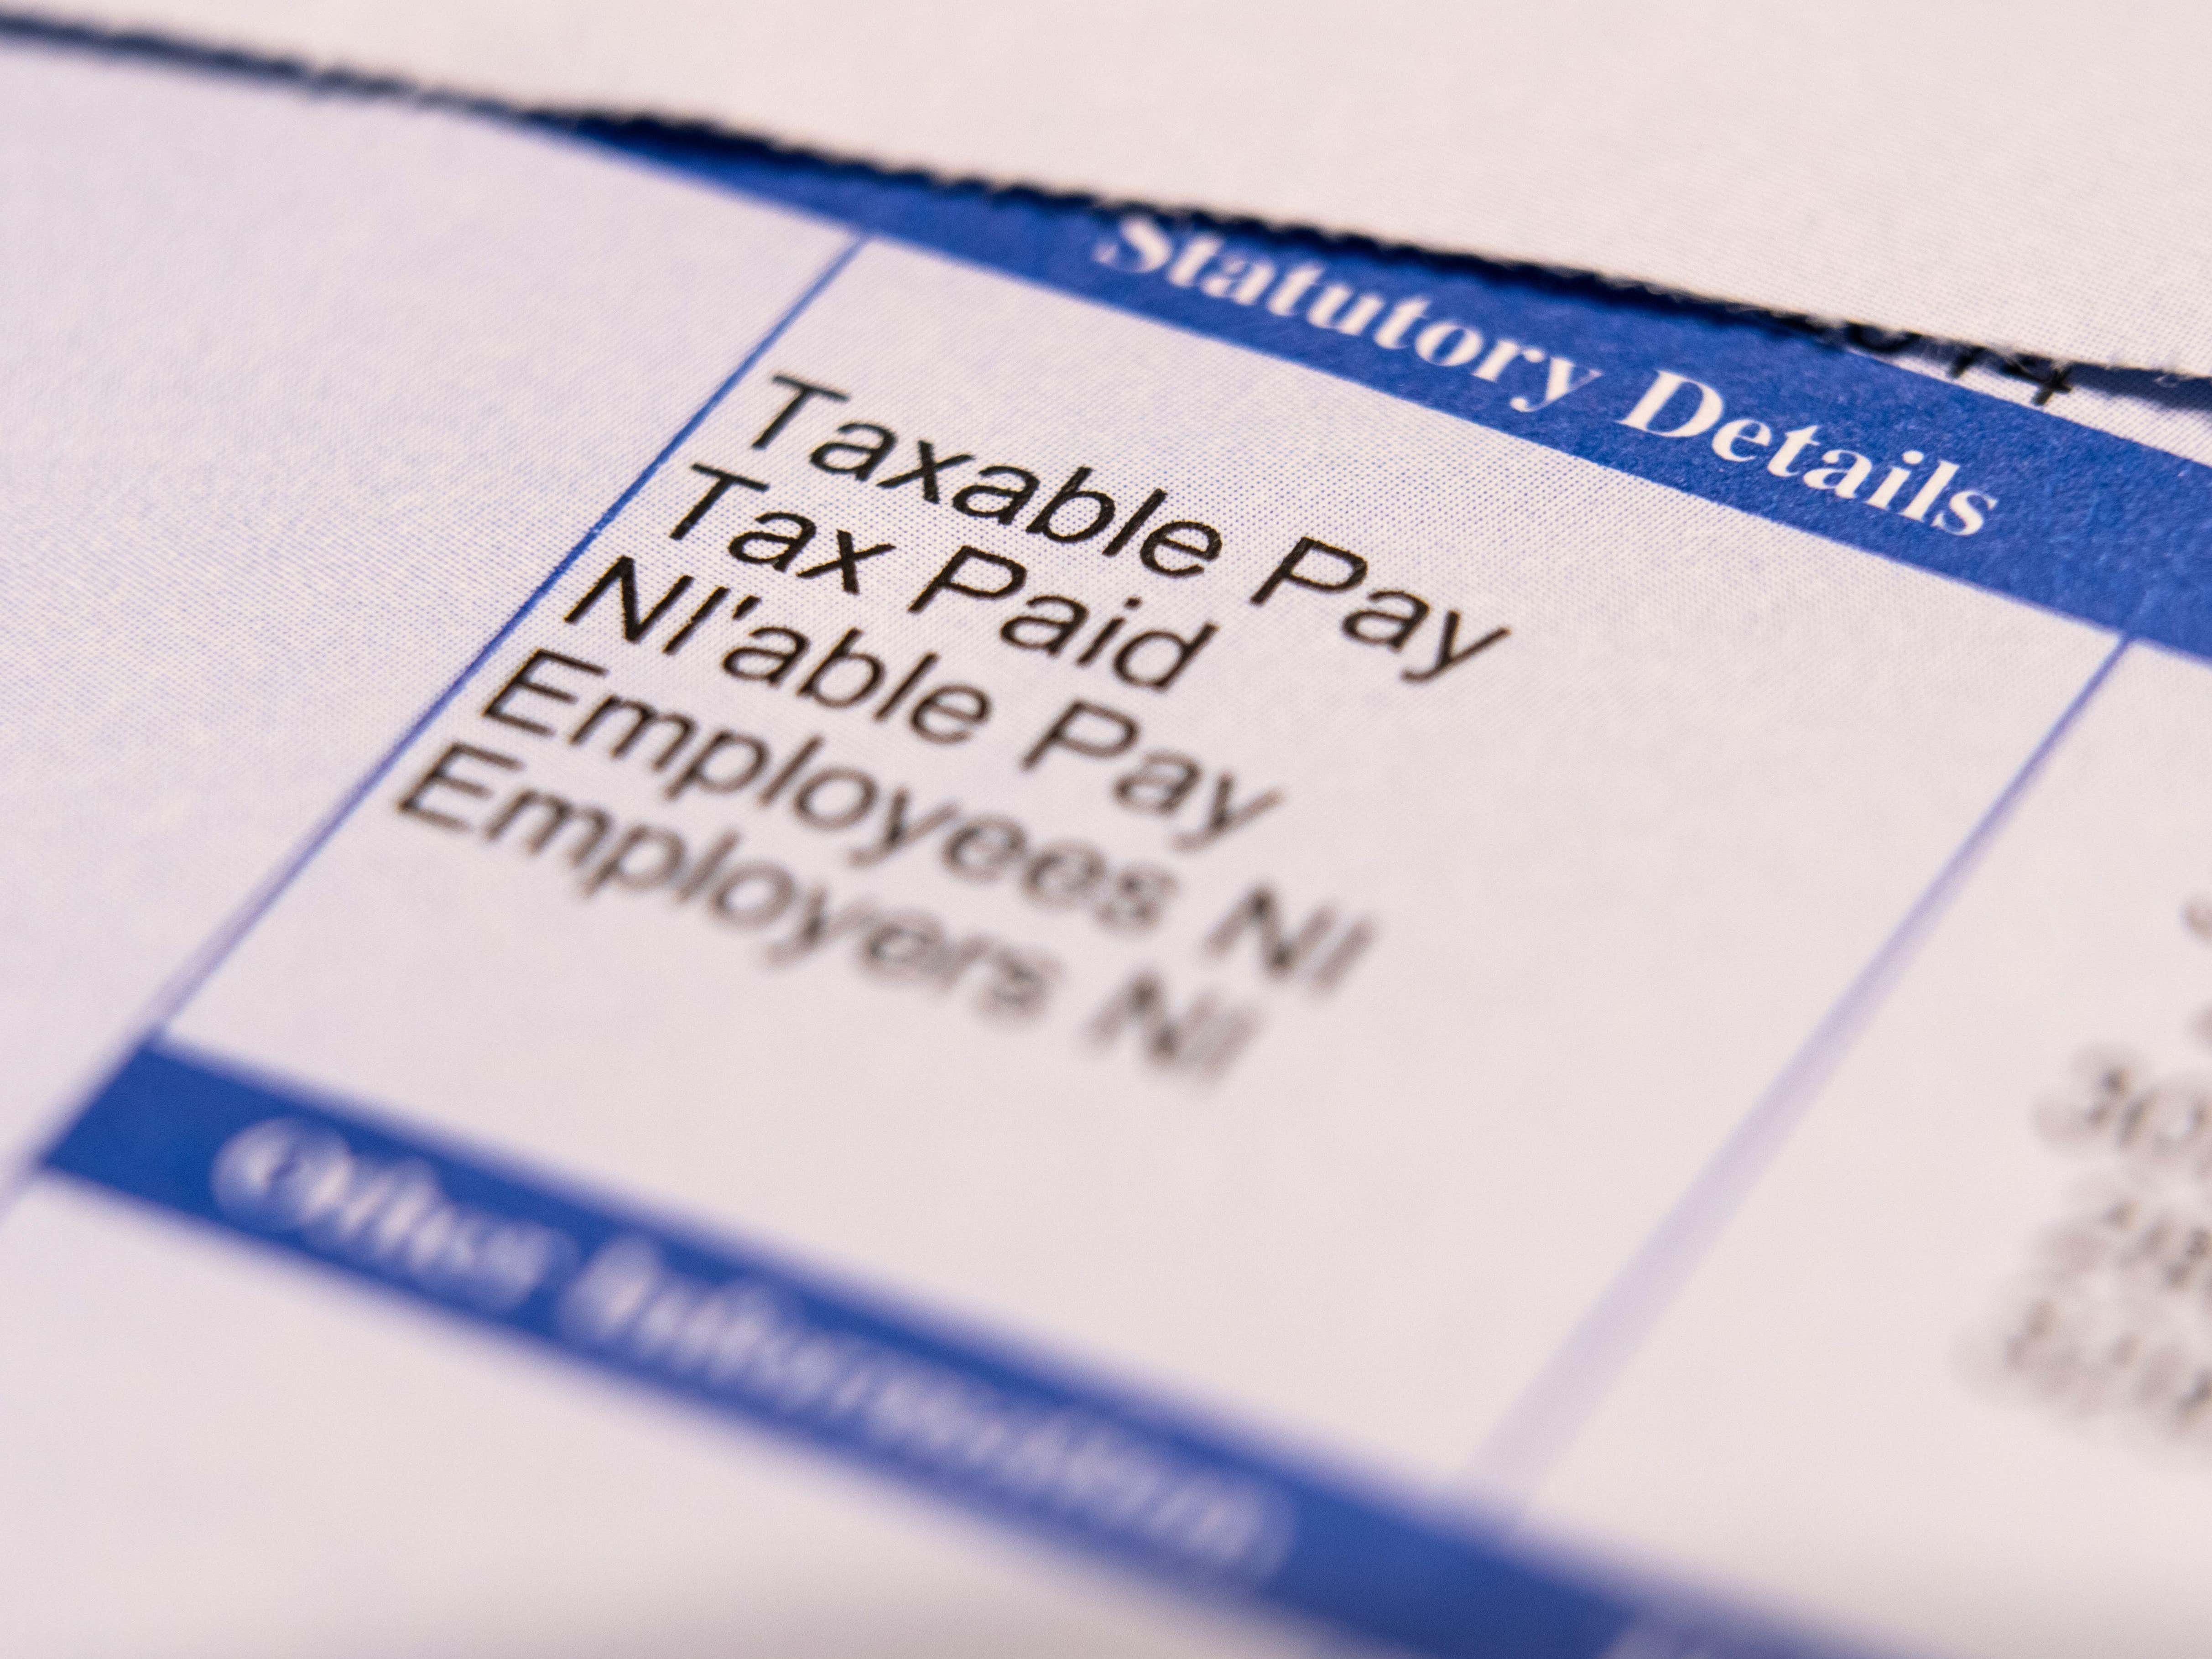 Payroll software halted by global IT outage, say businesses